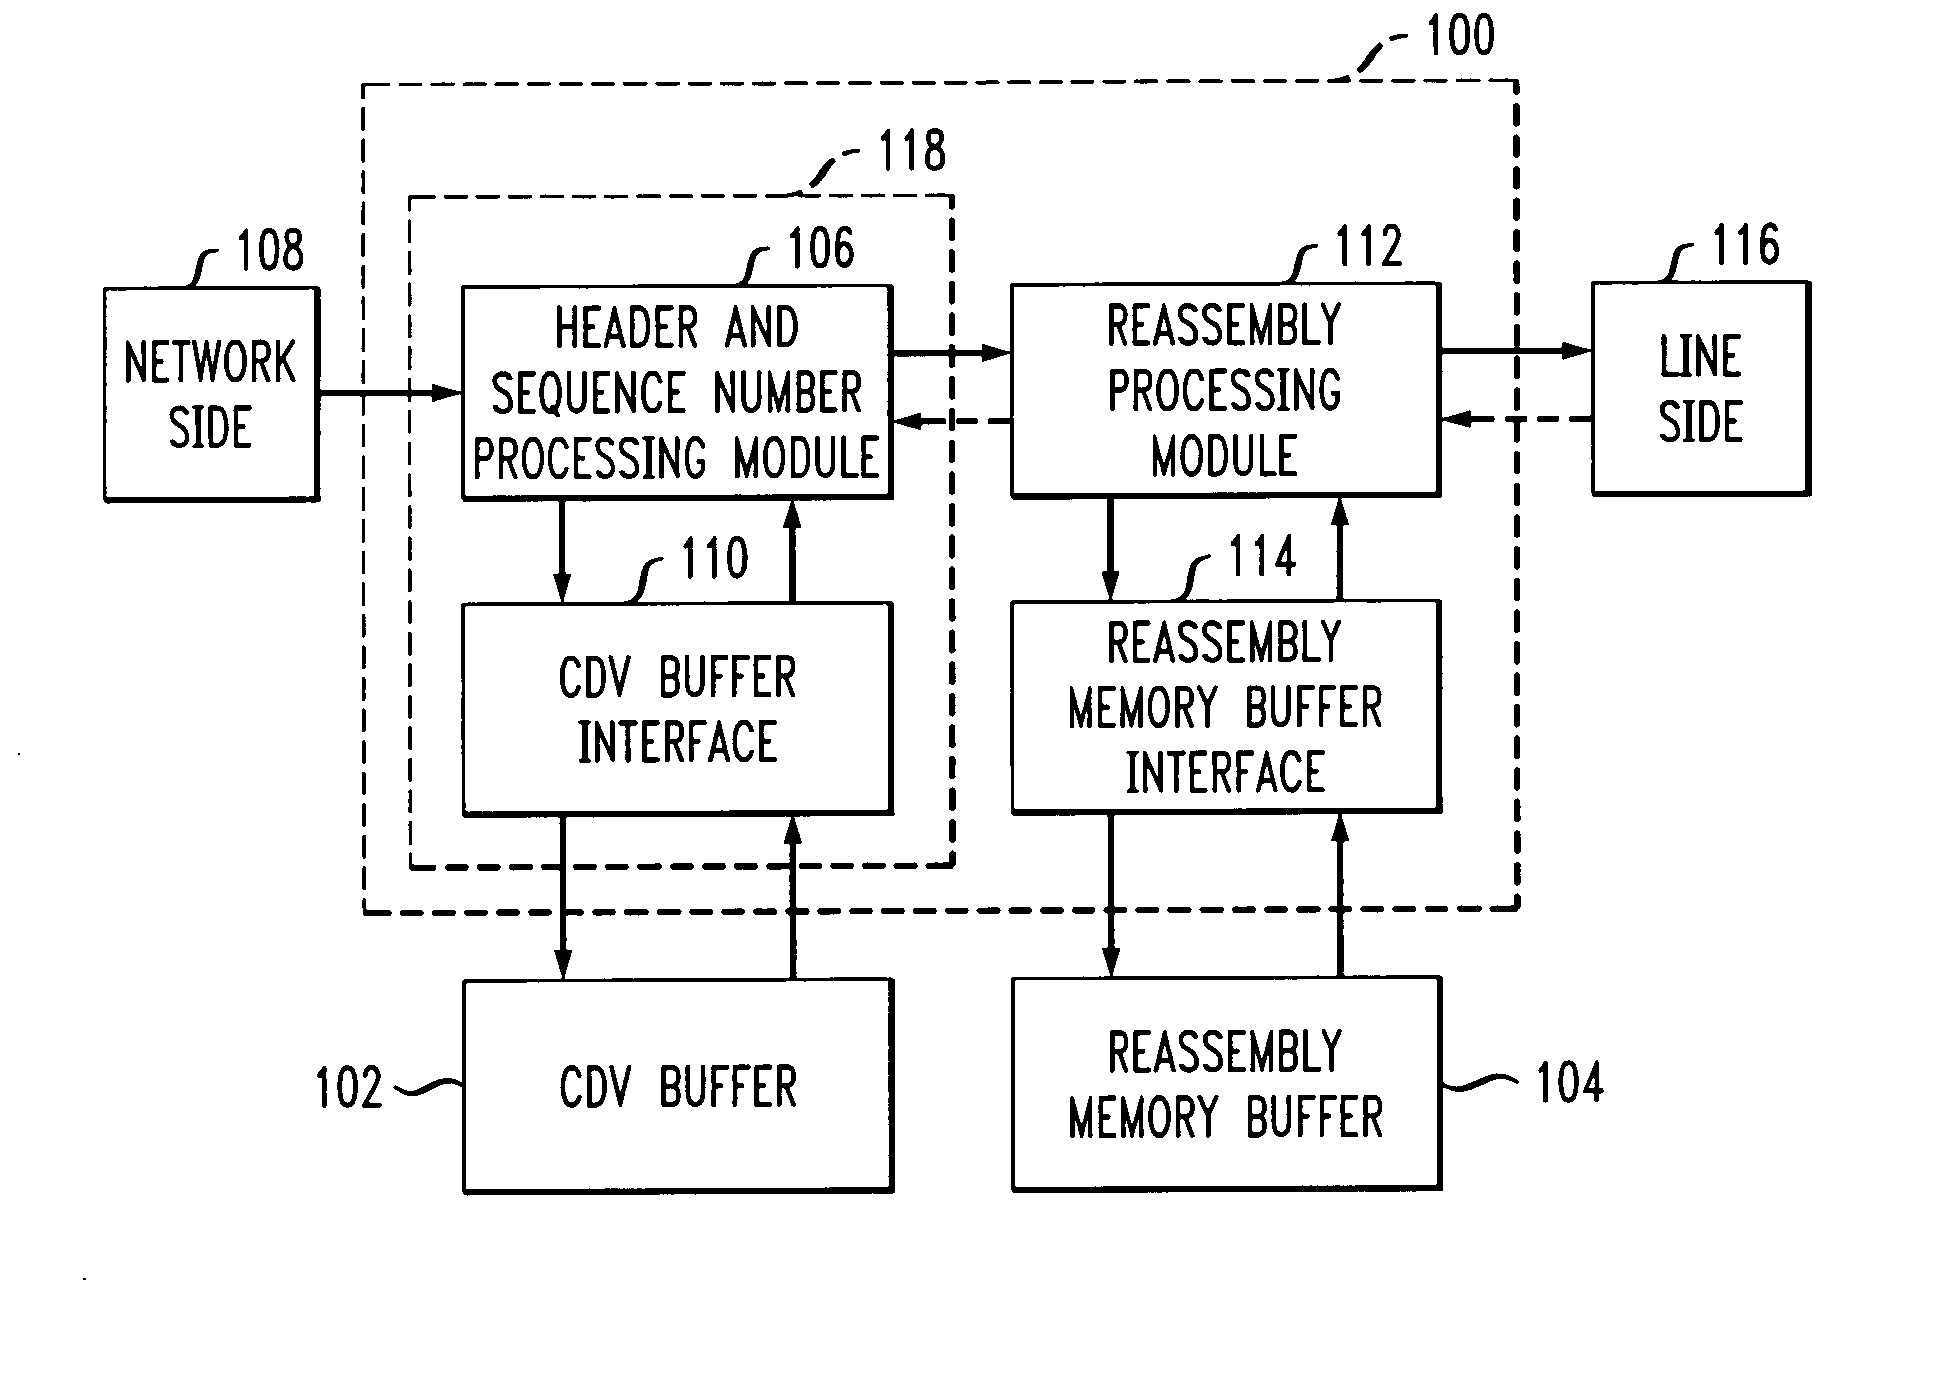 Apparatus and method for processing cells in a communications system